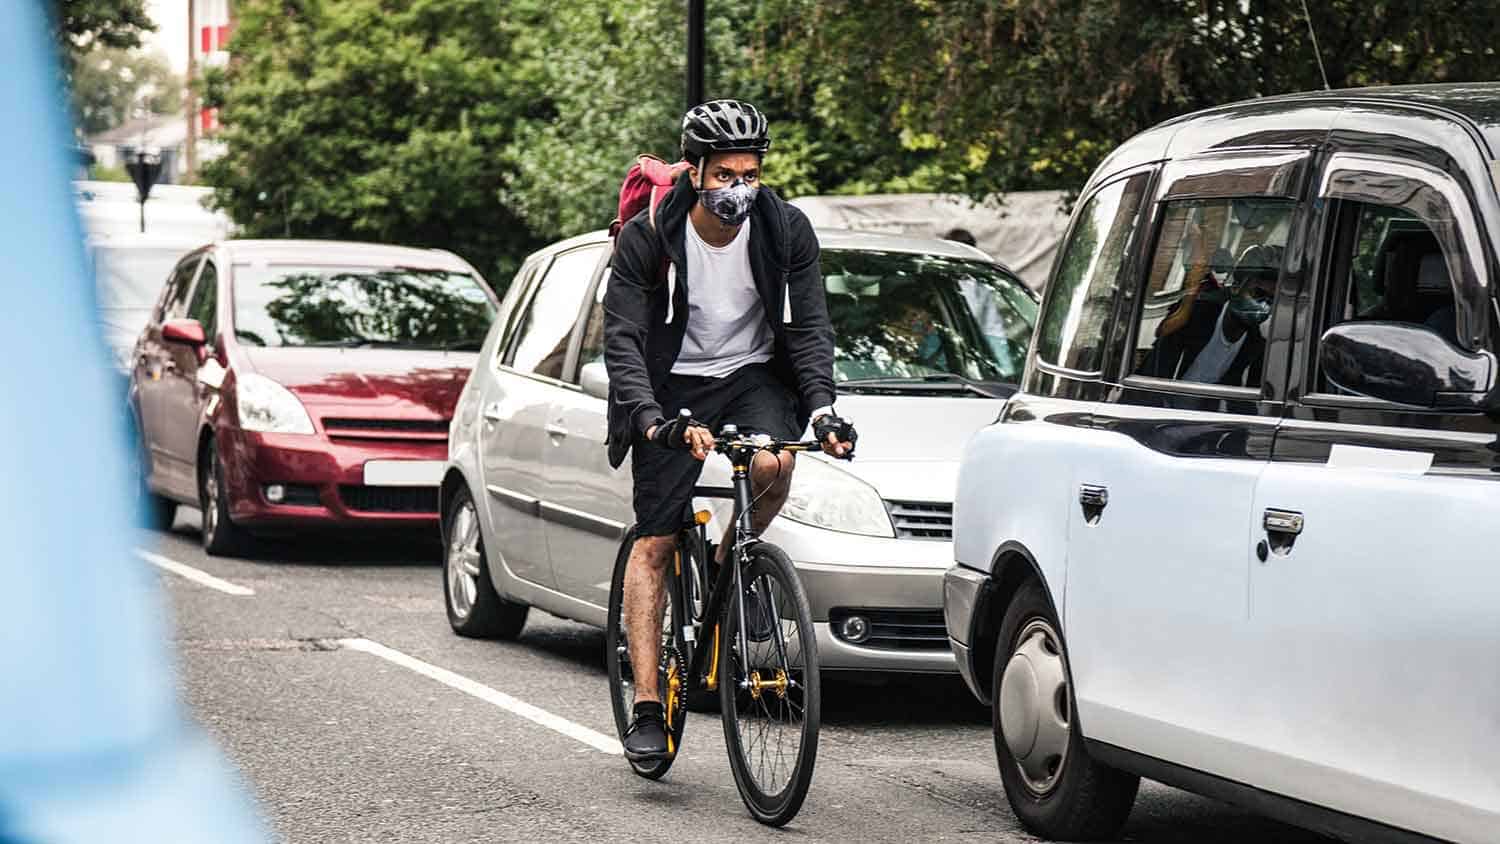 Cyclist with a face mask riding through traffic